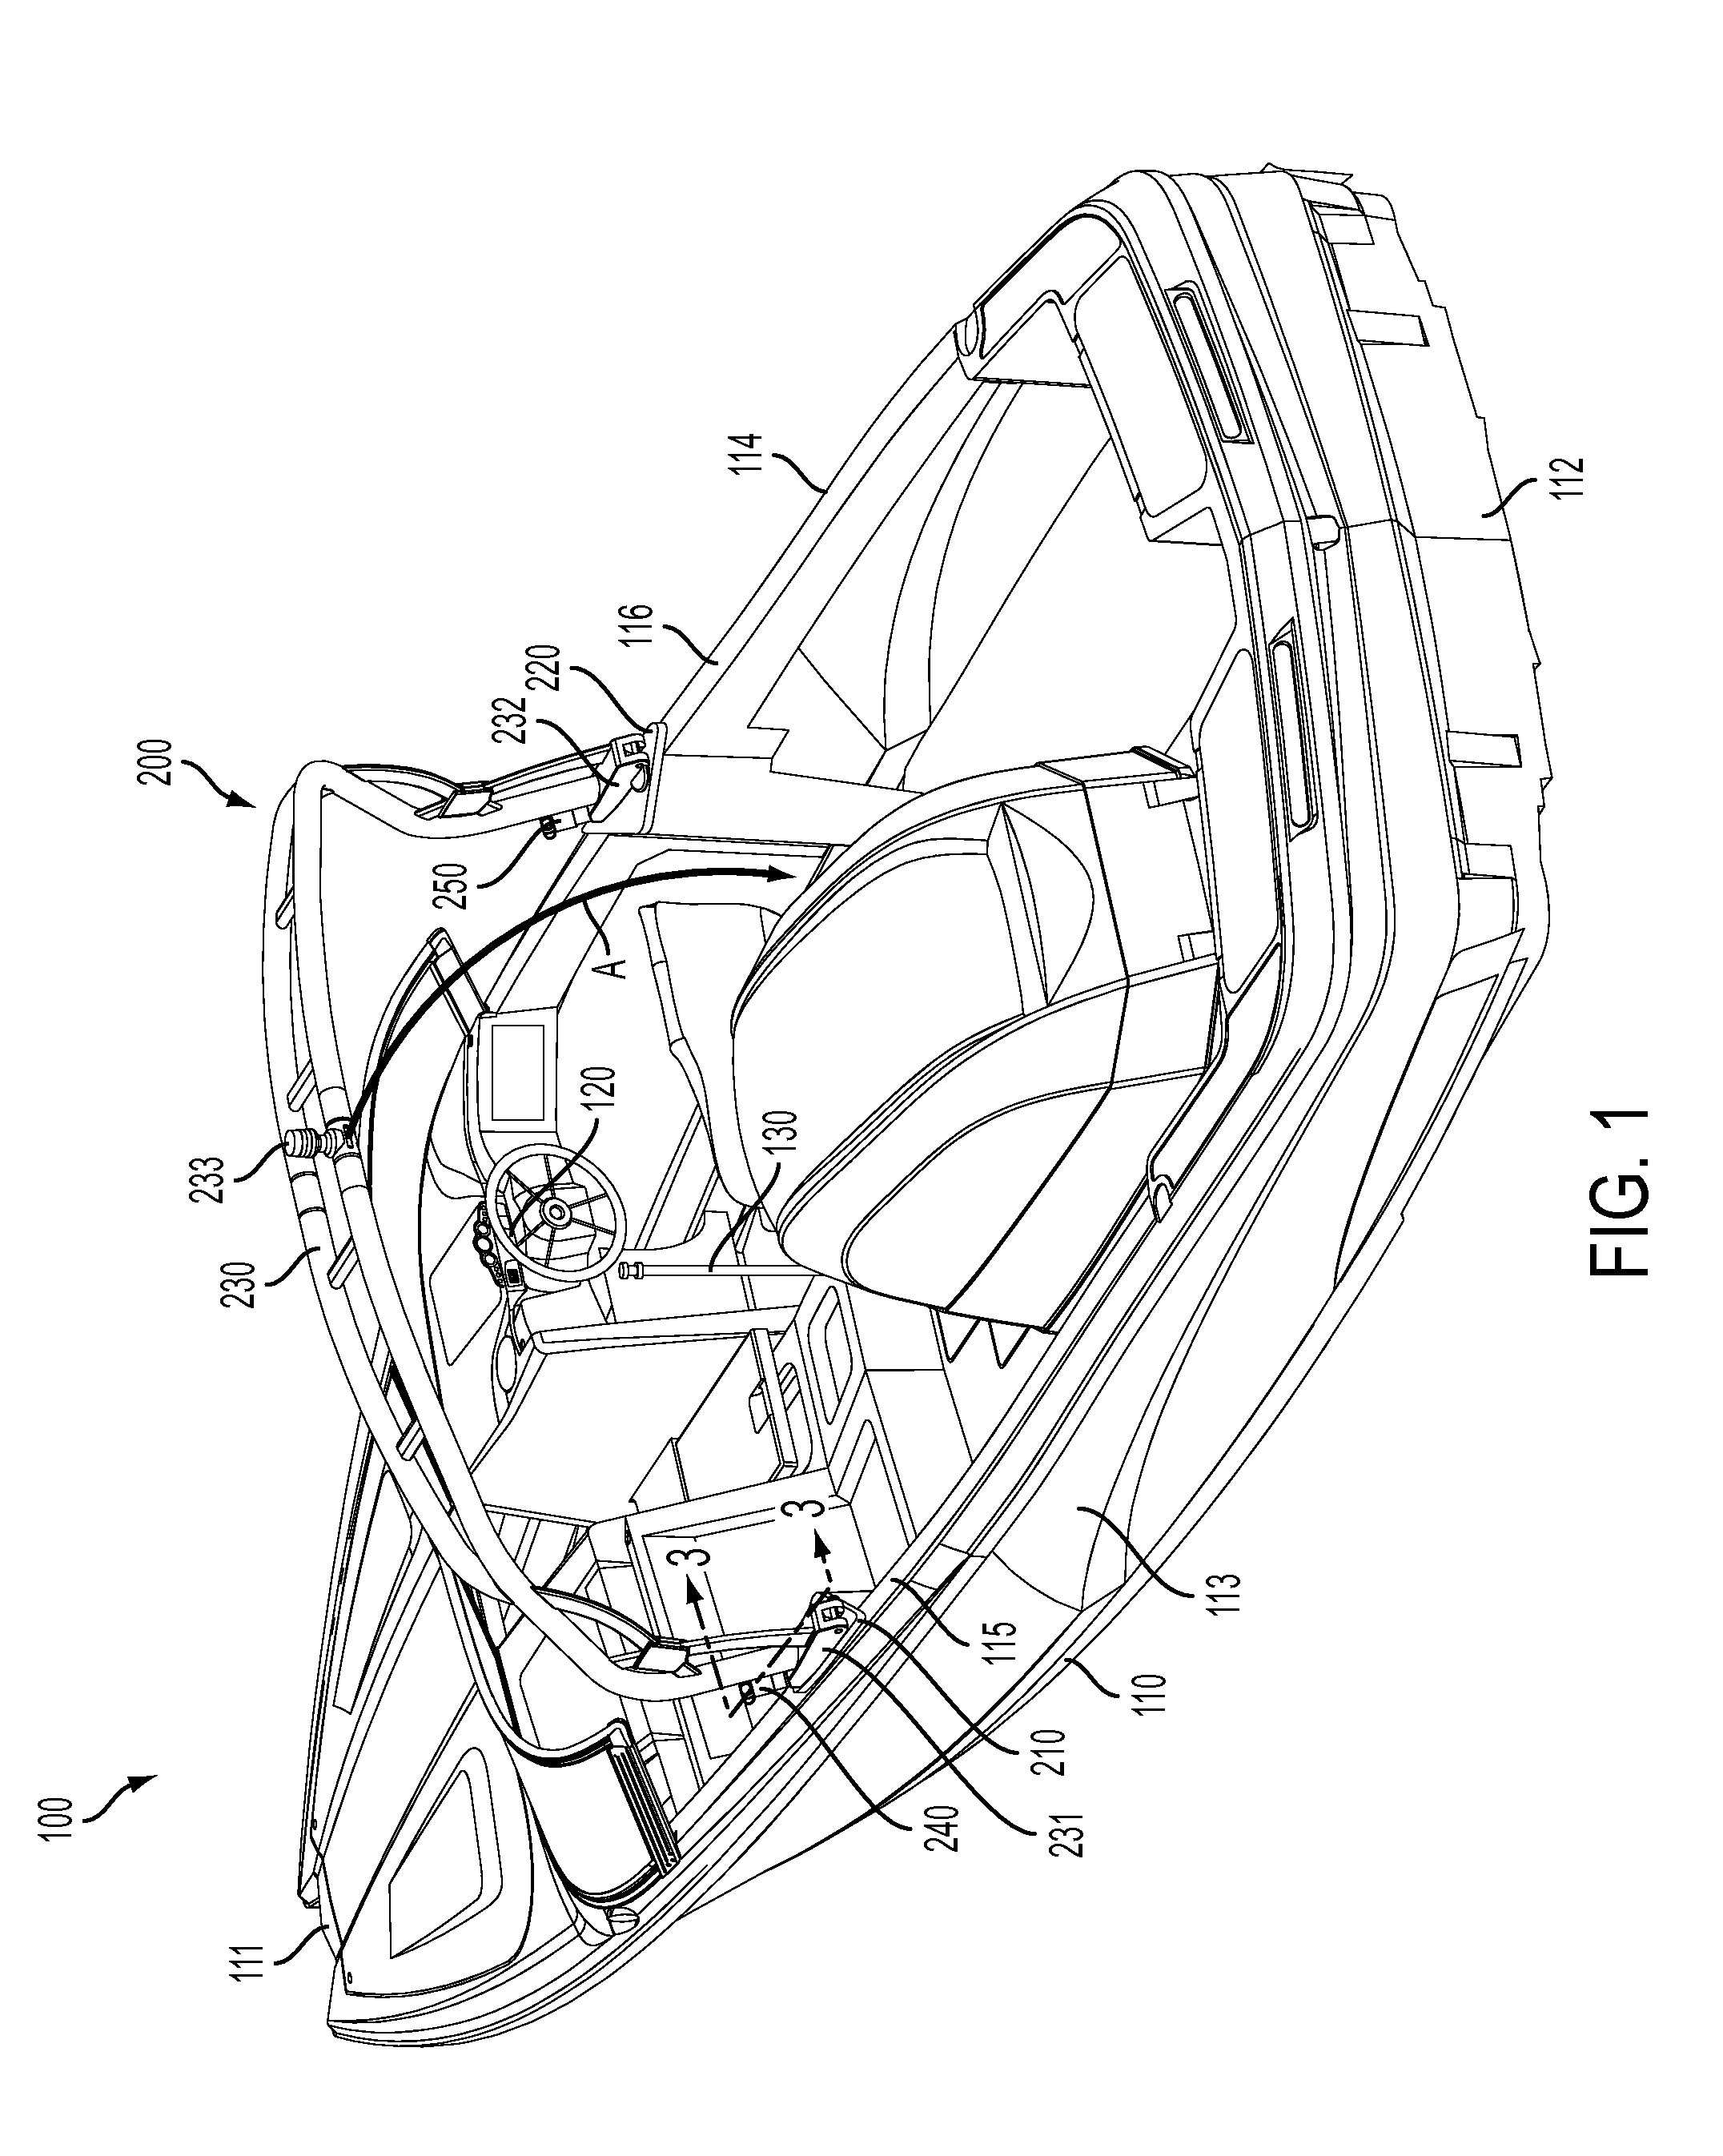 Apparatus for towing a water sports performer